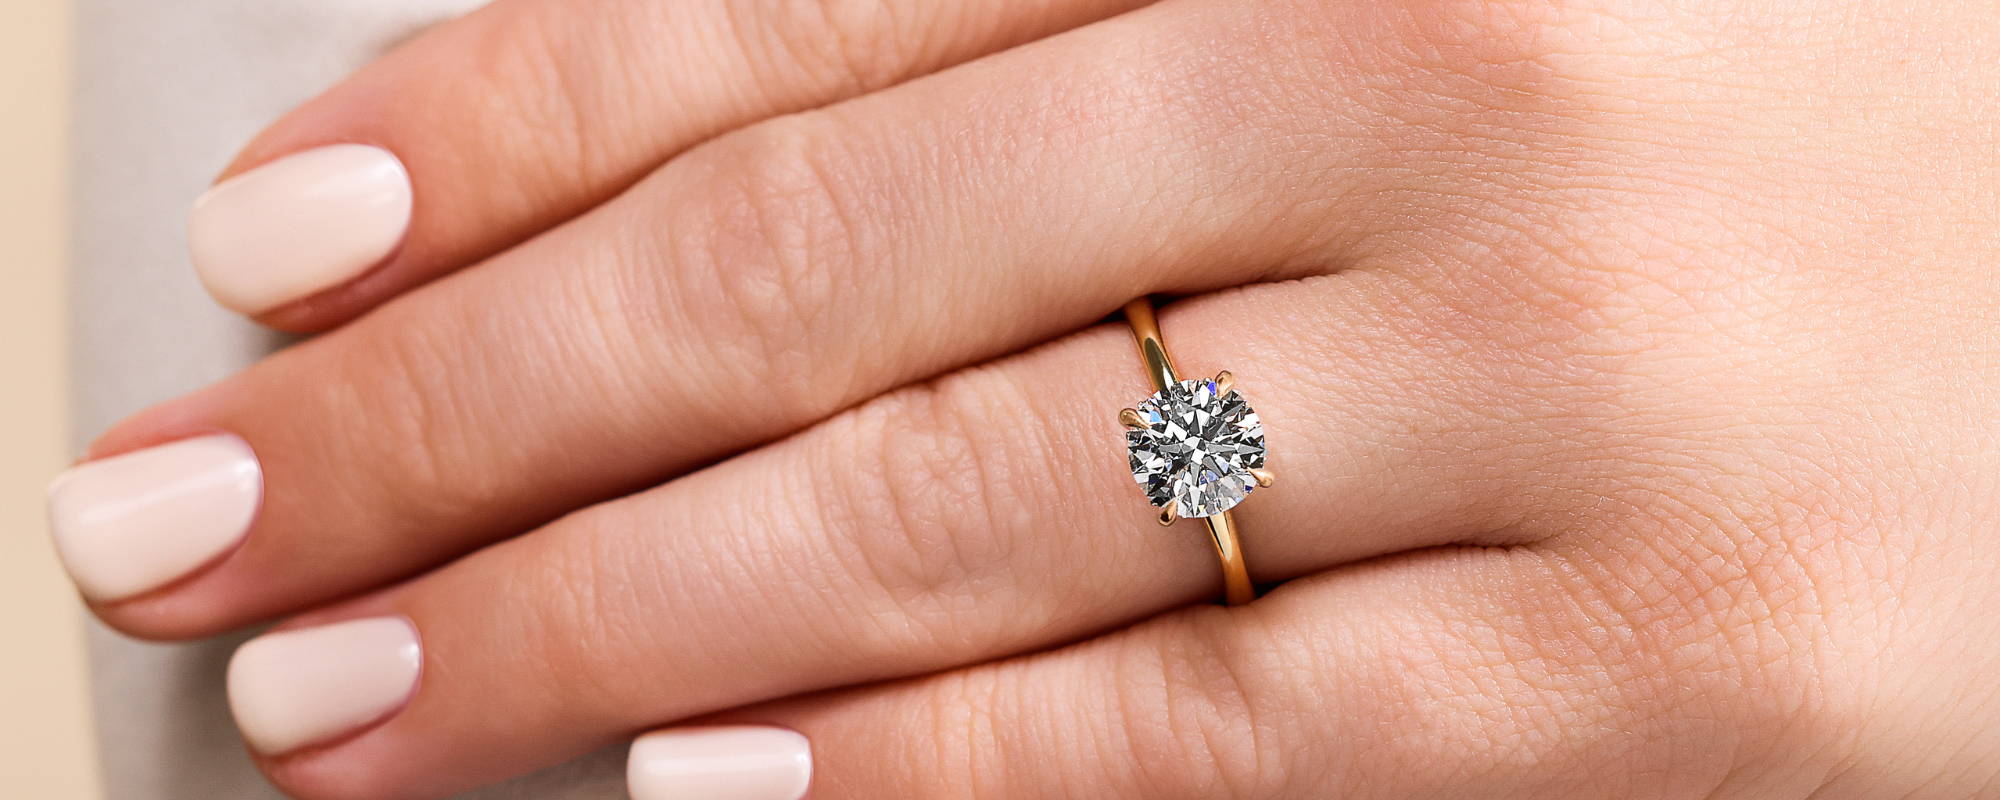 MiaDonna’s Top 7 Pre-Styled Engagement Rings